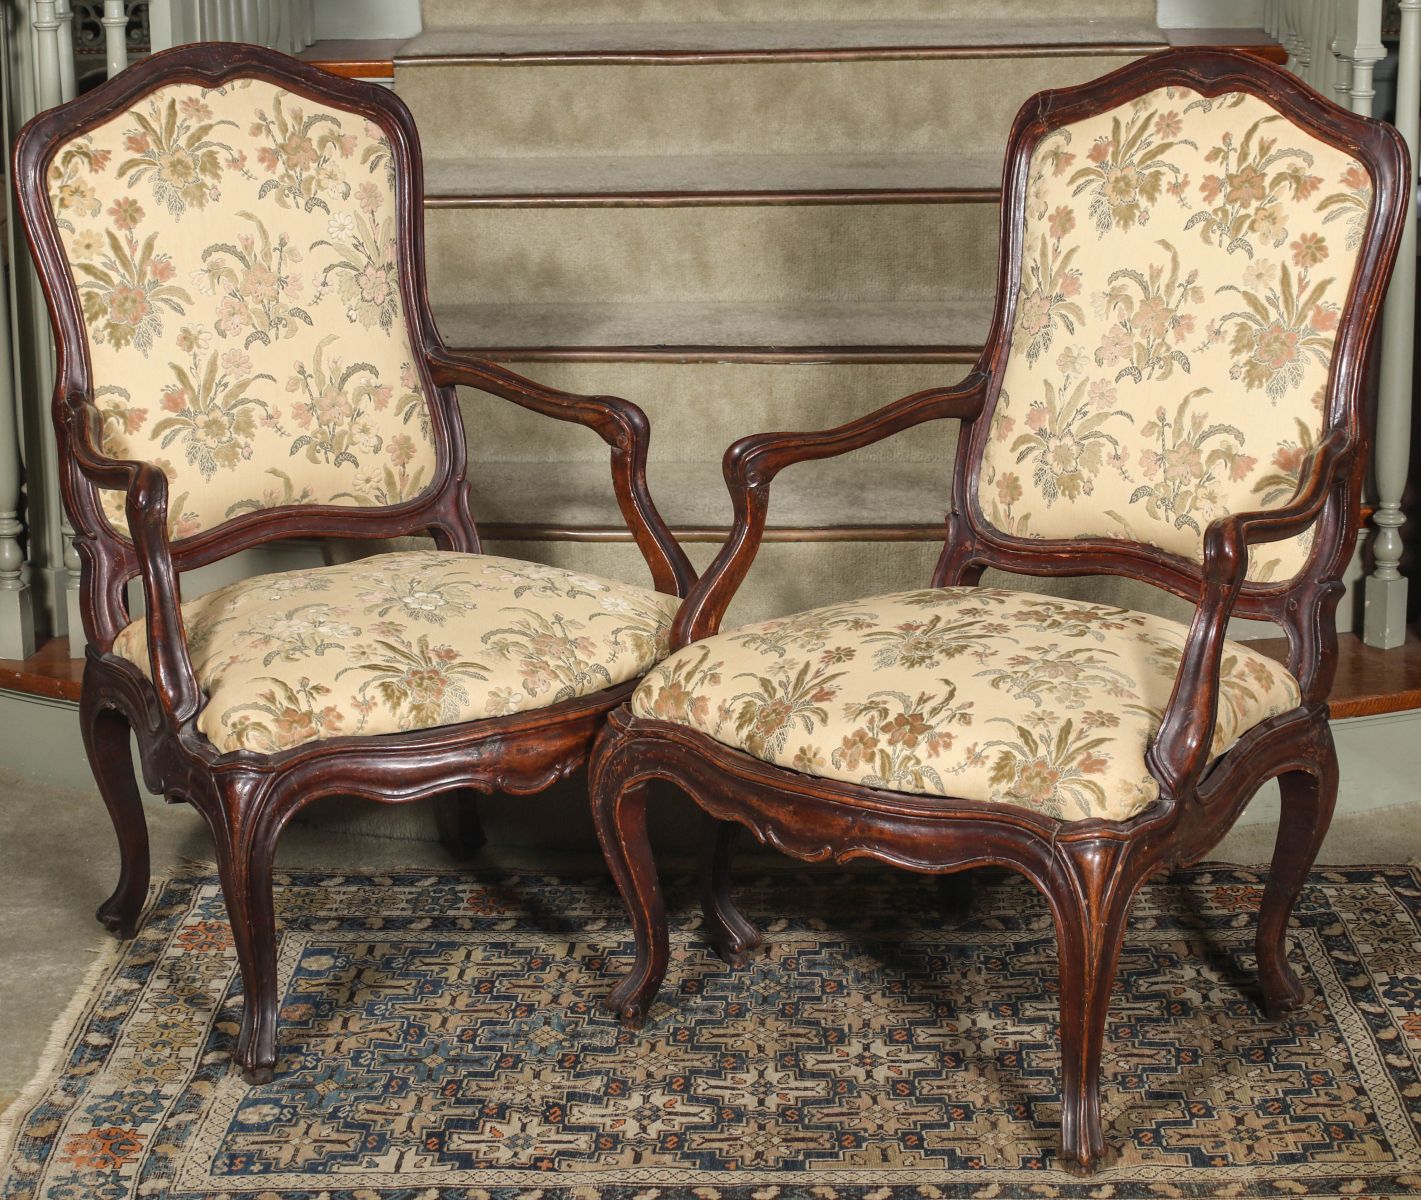 A PAIR EARLY 18TH CENTURY ITALIAN FRUITWOOD ARM CHAIRS